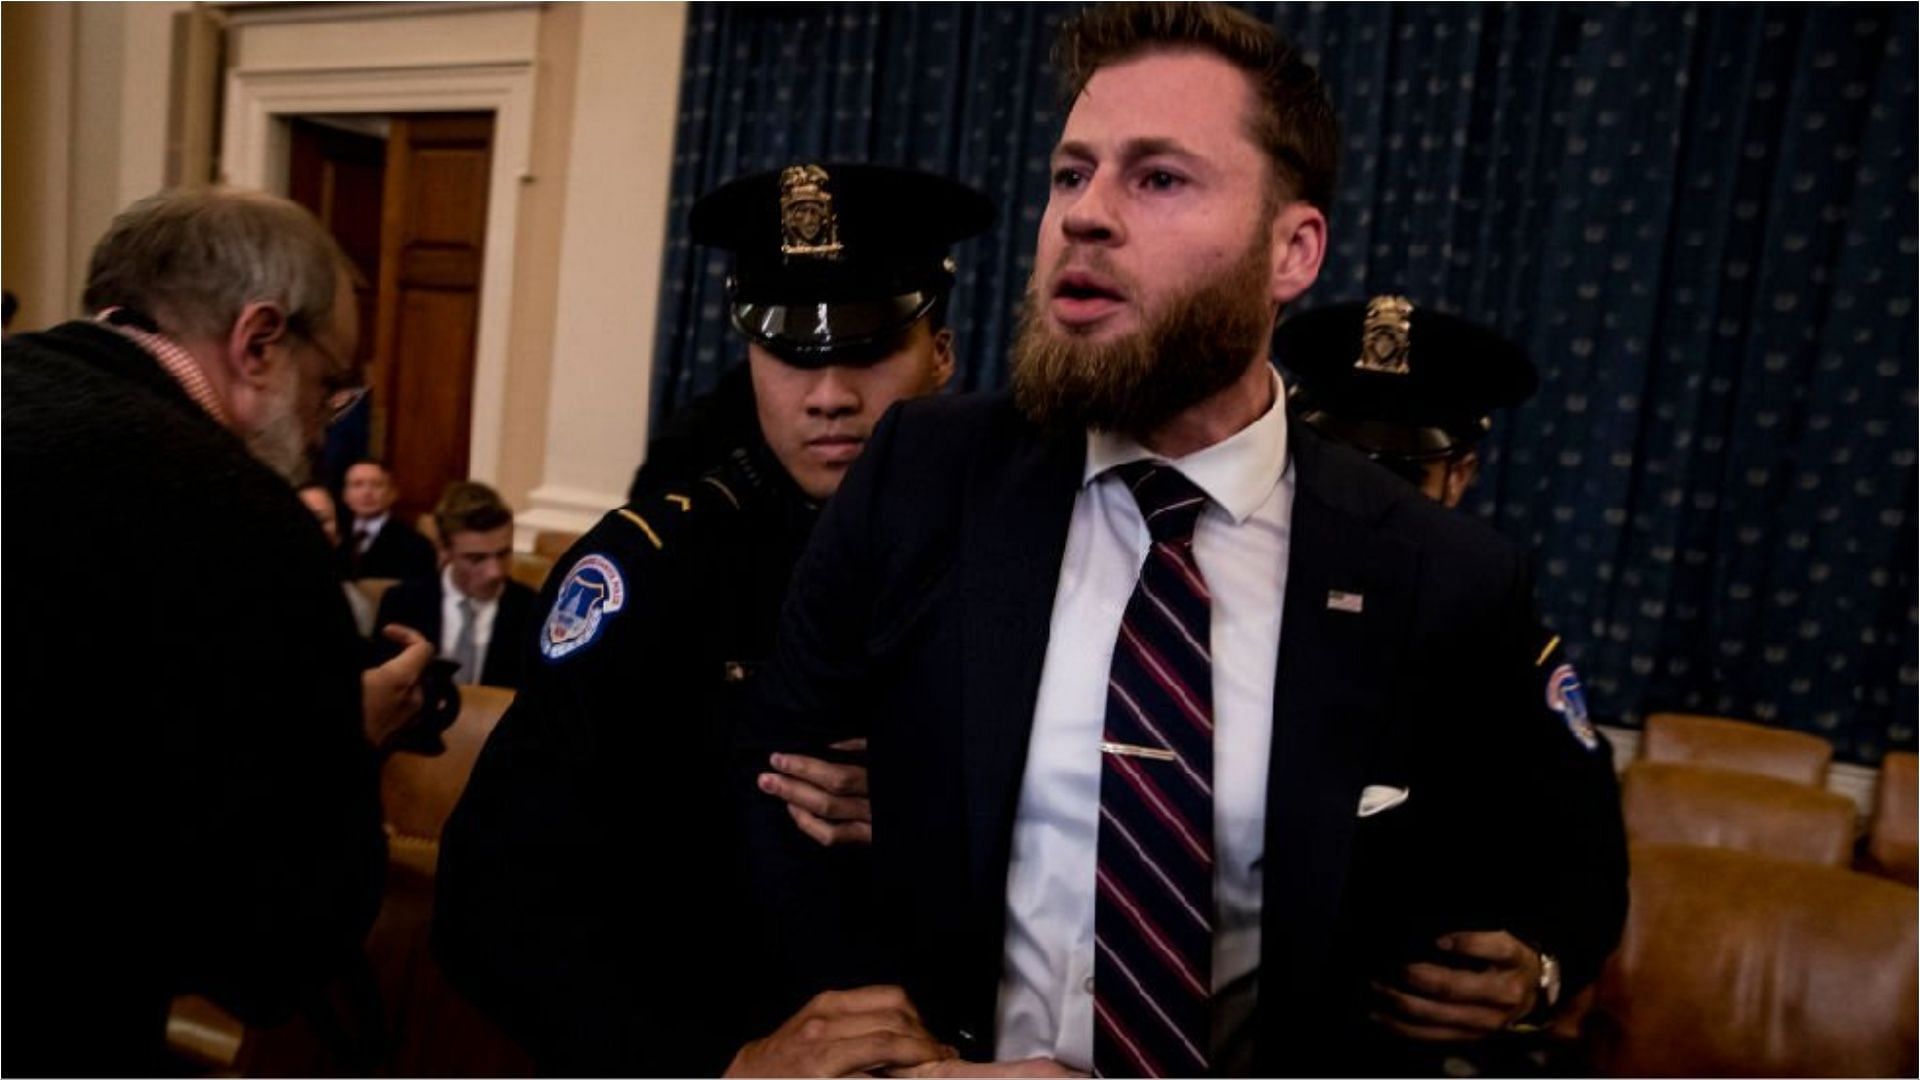 Owen Shroyer has been sentenced for his involvement in the US Capitol riots (Image via Anna Moneymaker-Pool/Getty Images)